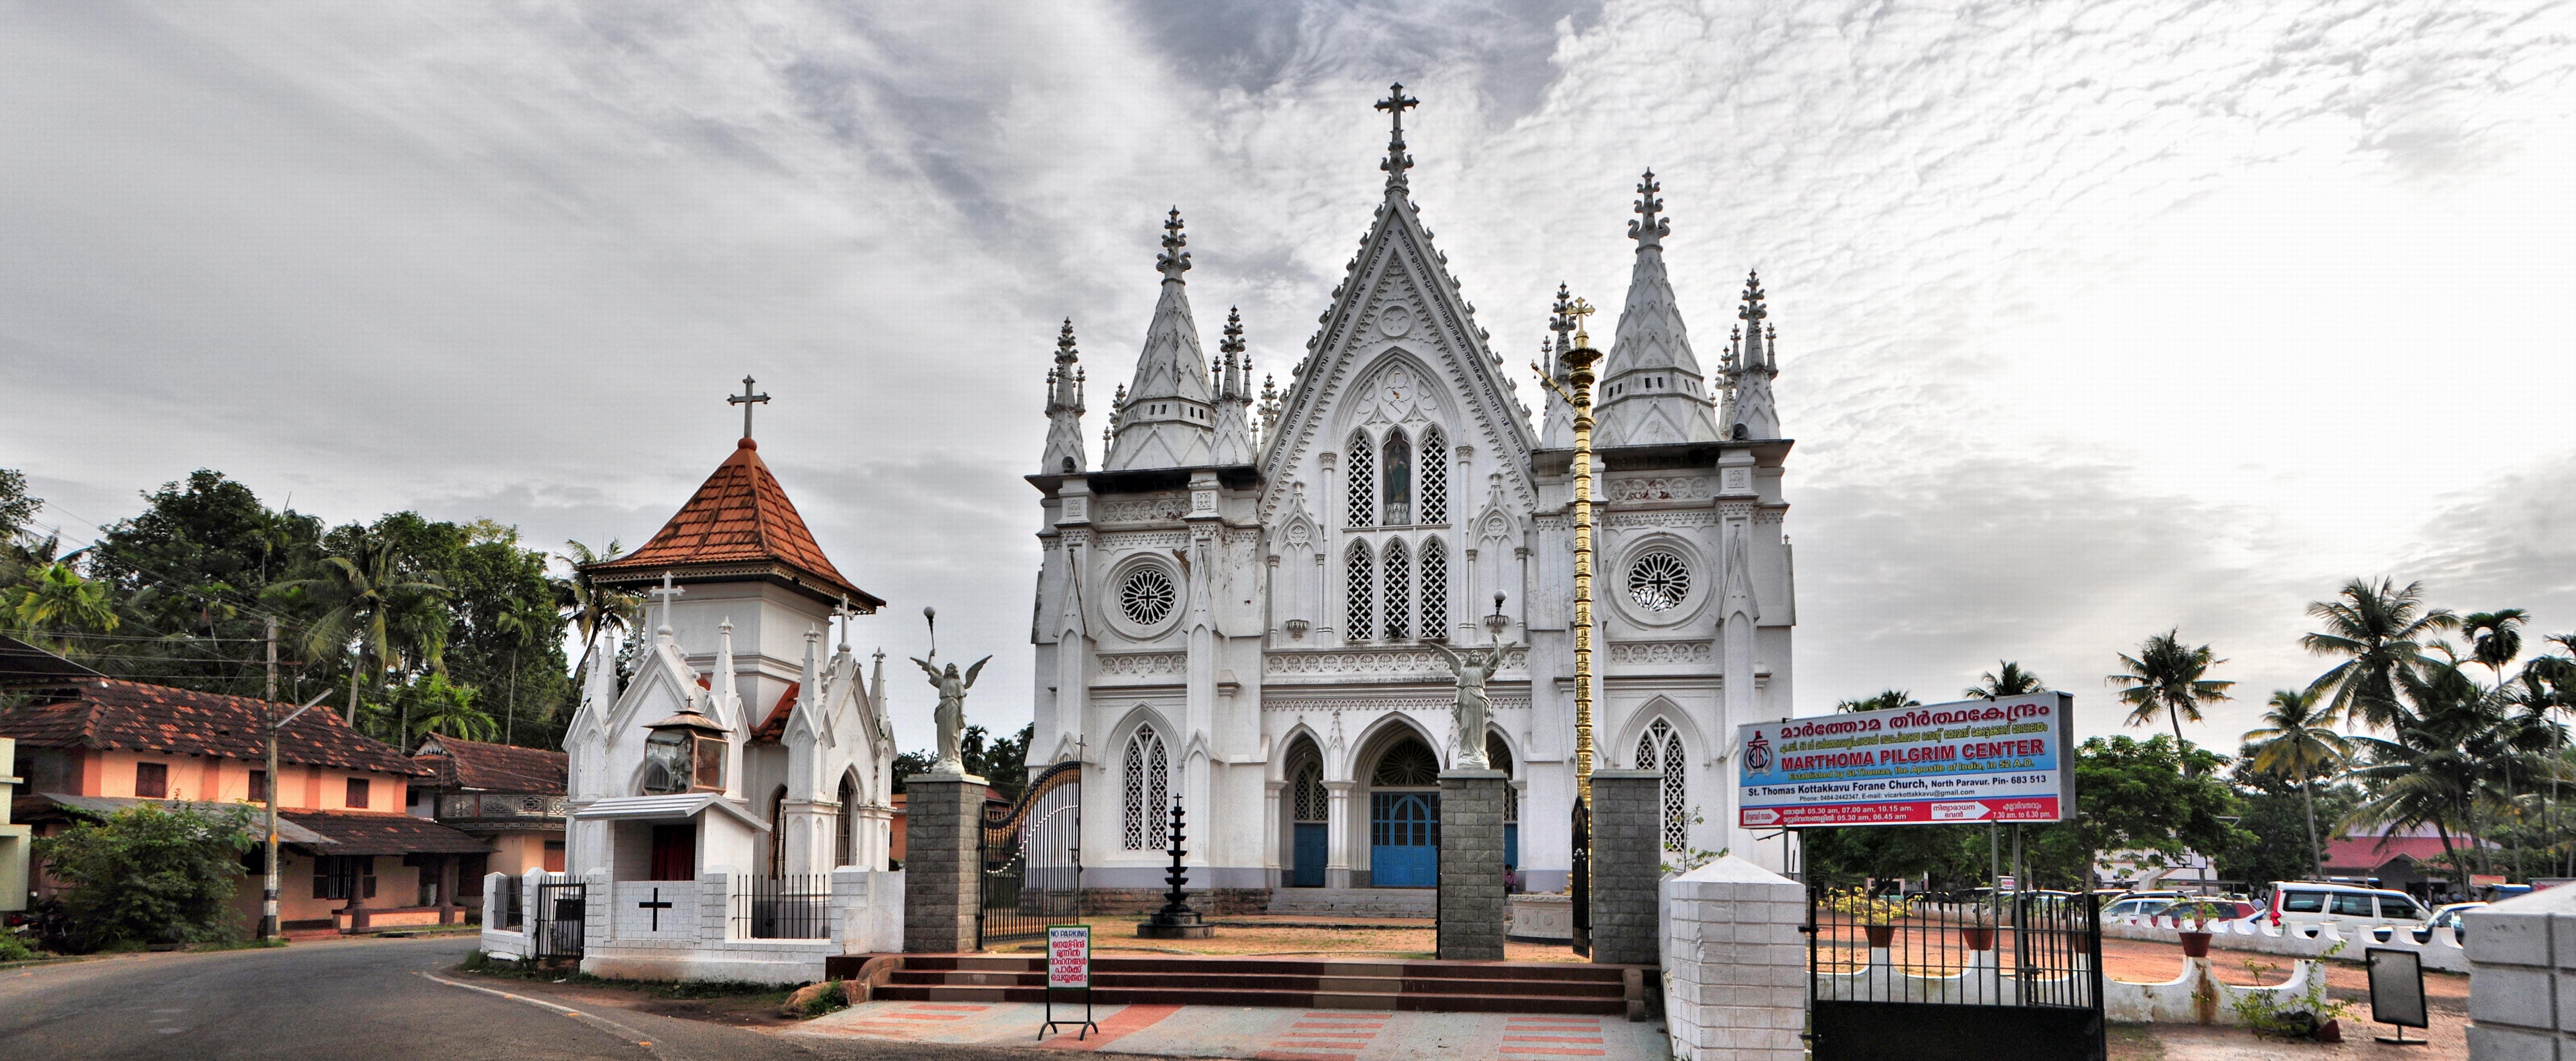 Kerala Church Says Can’t Ban Confessions, Cites “Religious Freedom”